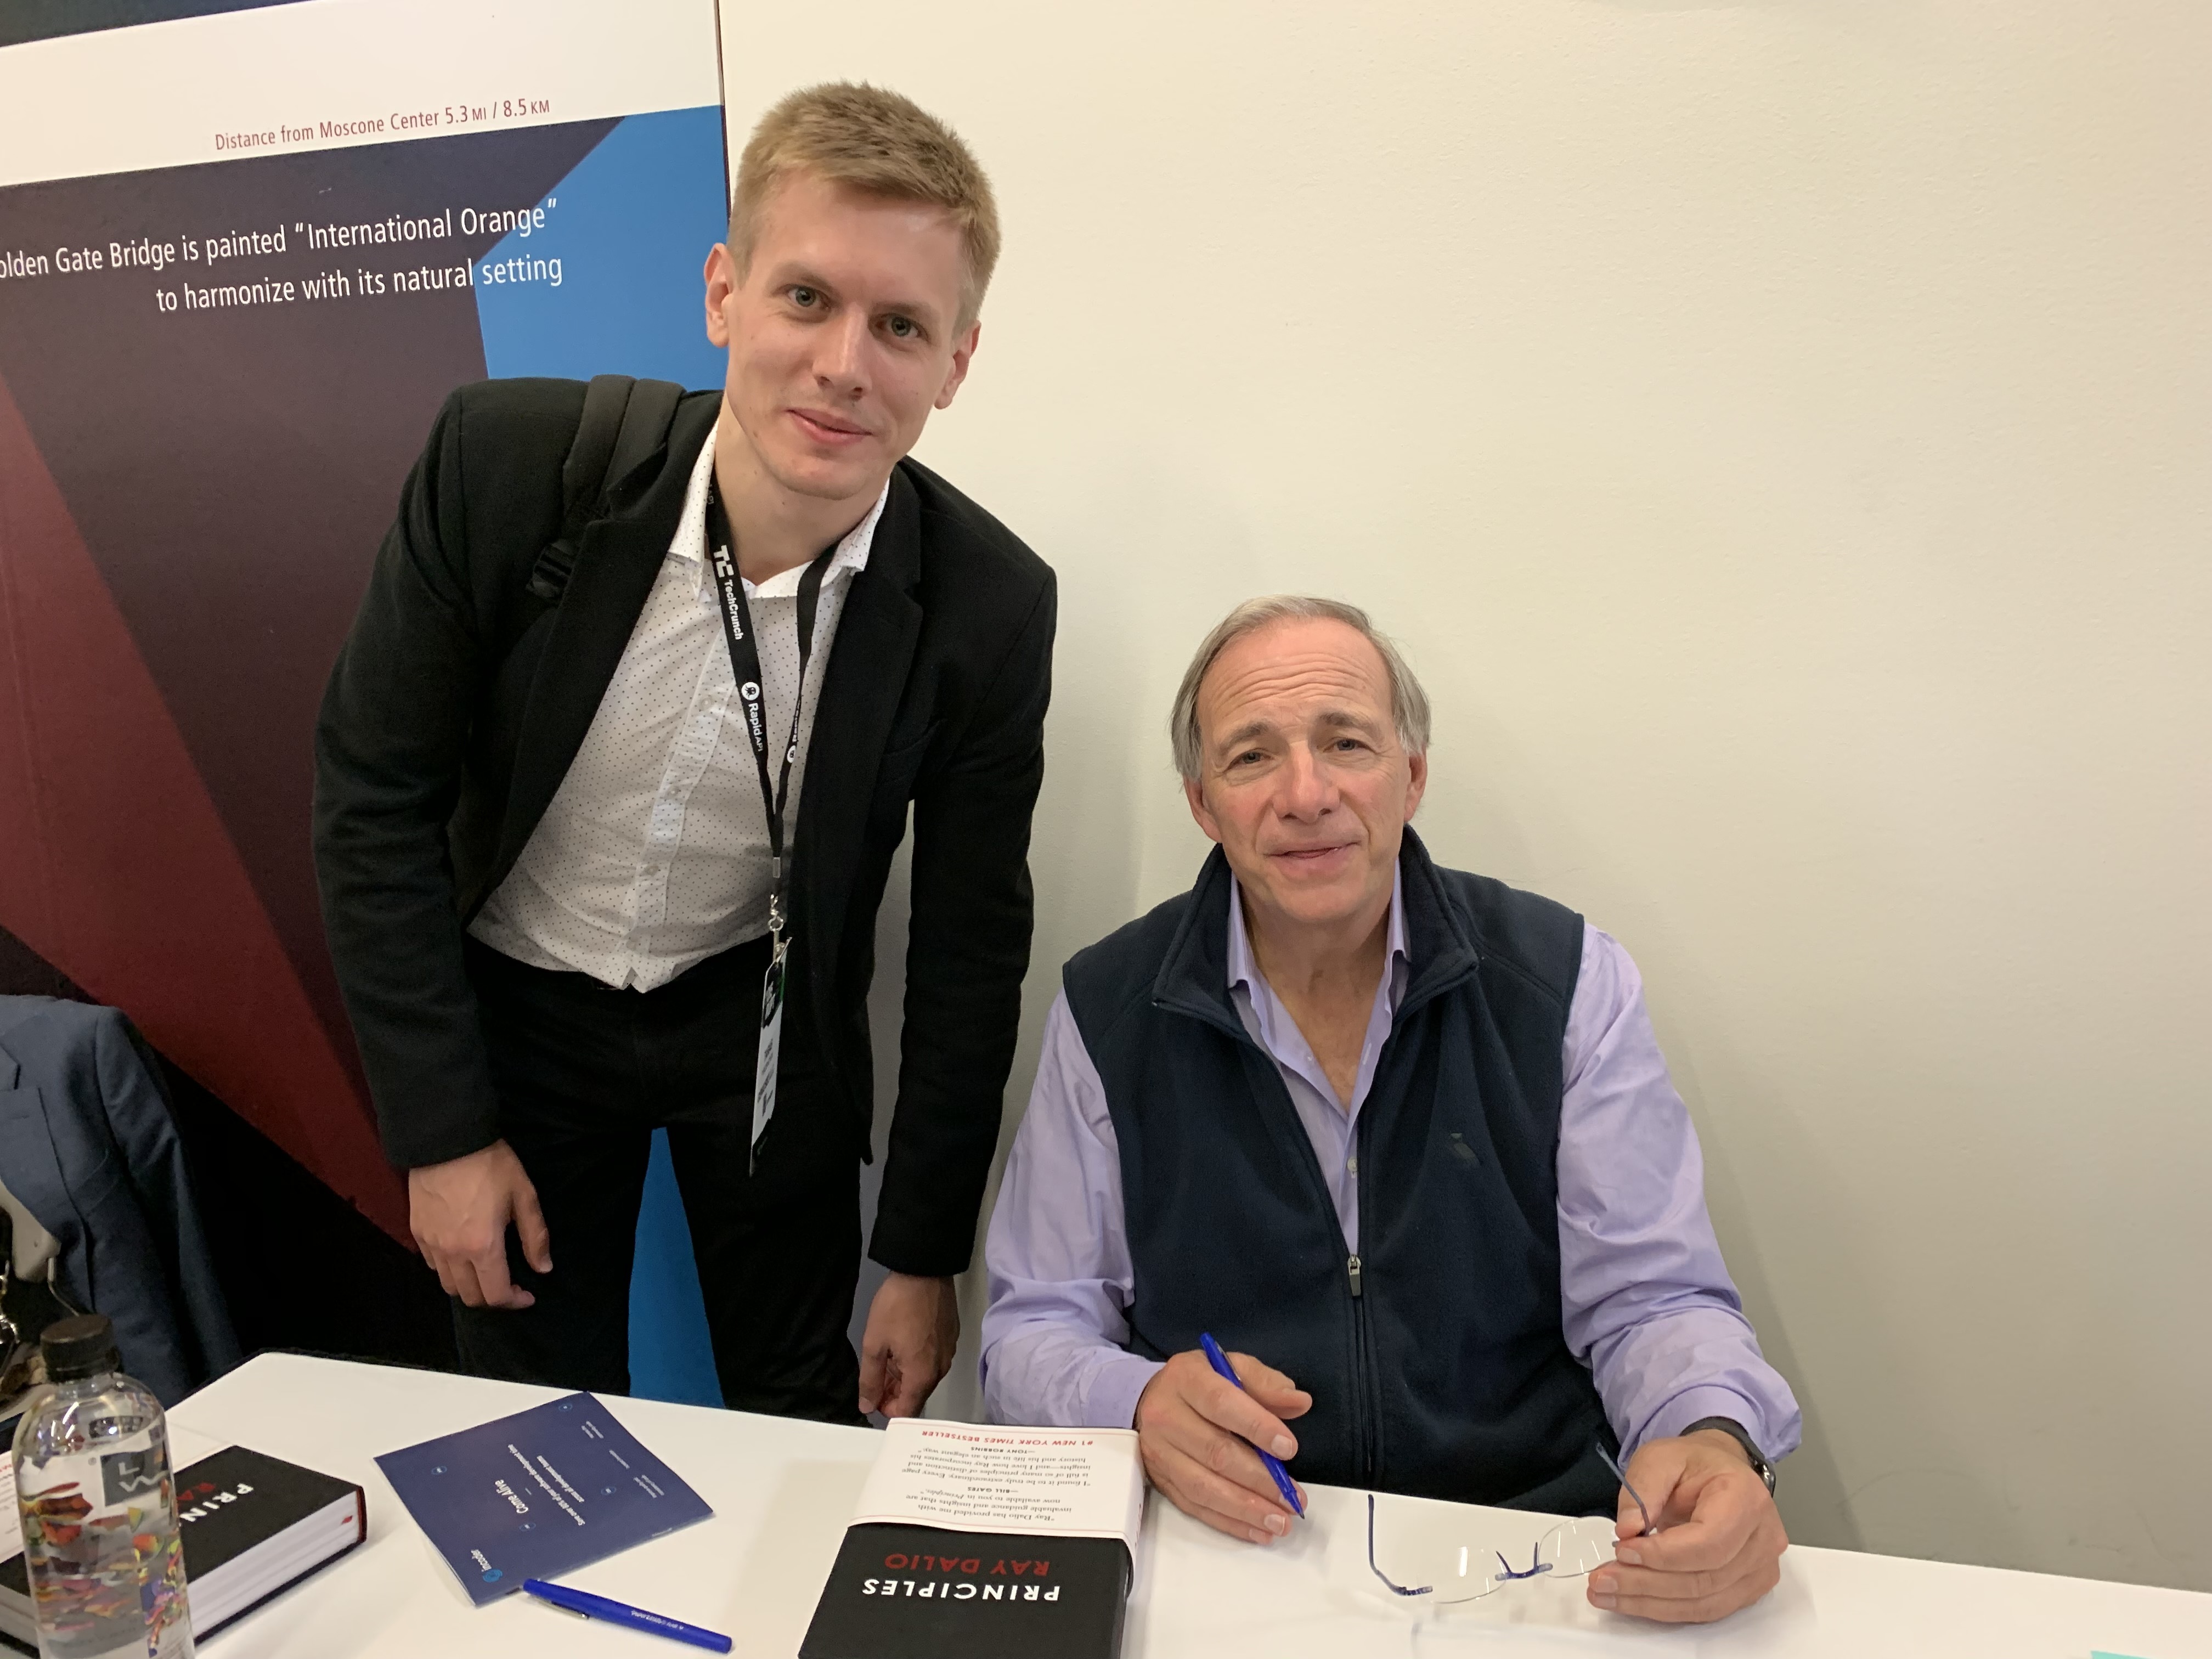 Me and Ray Dalio